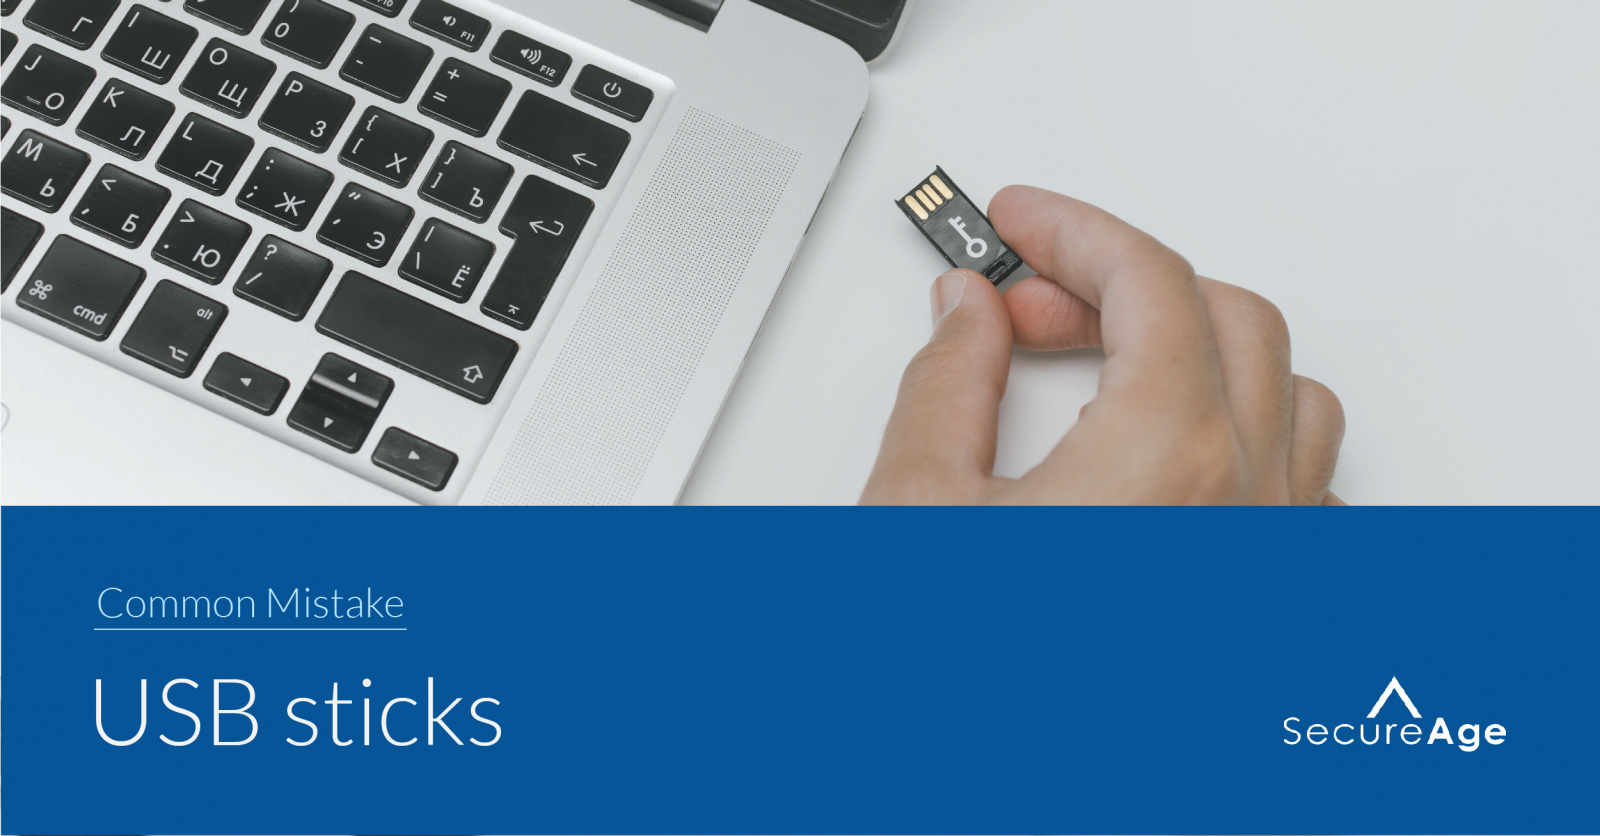 Mistakes humans make with data – Mistake #3: USB sticks